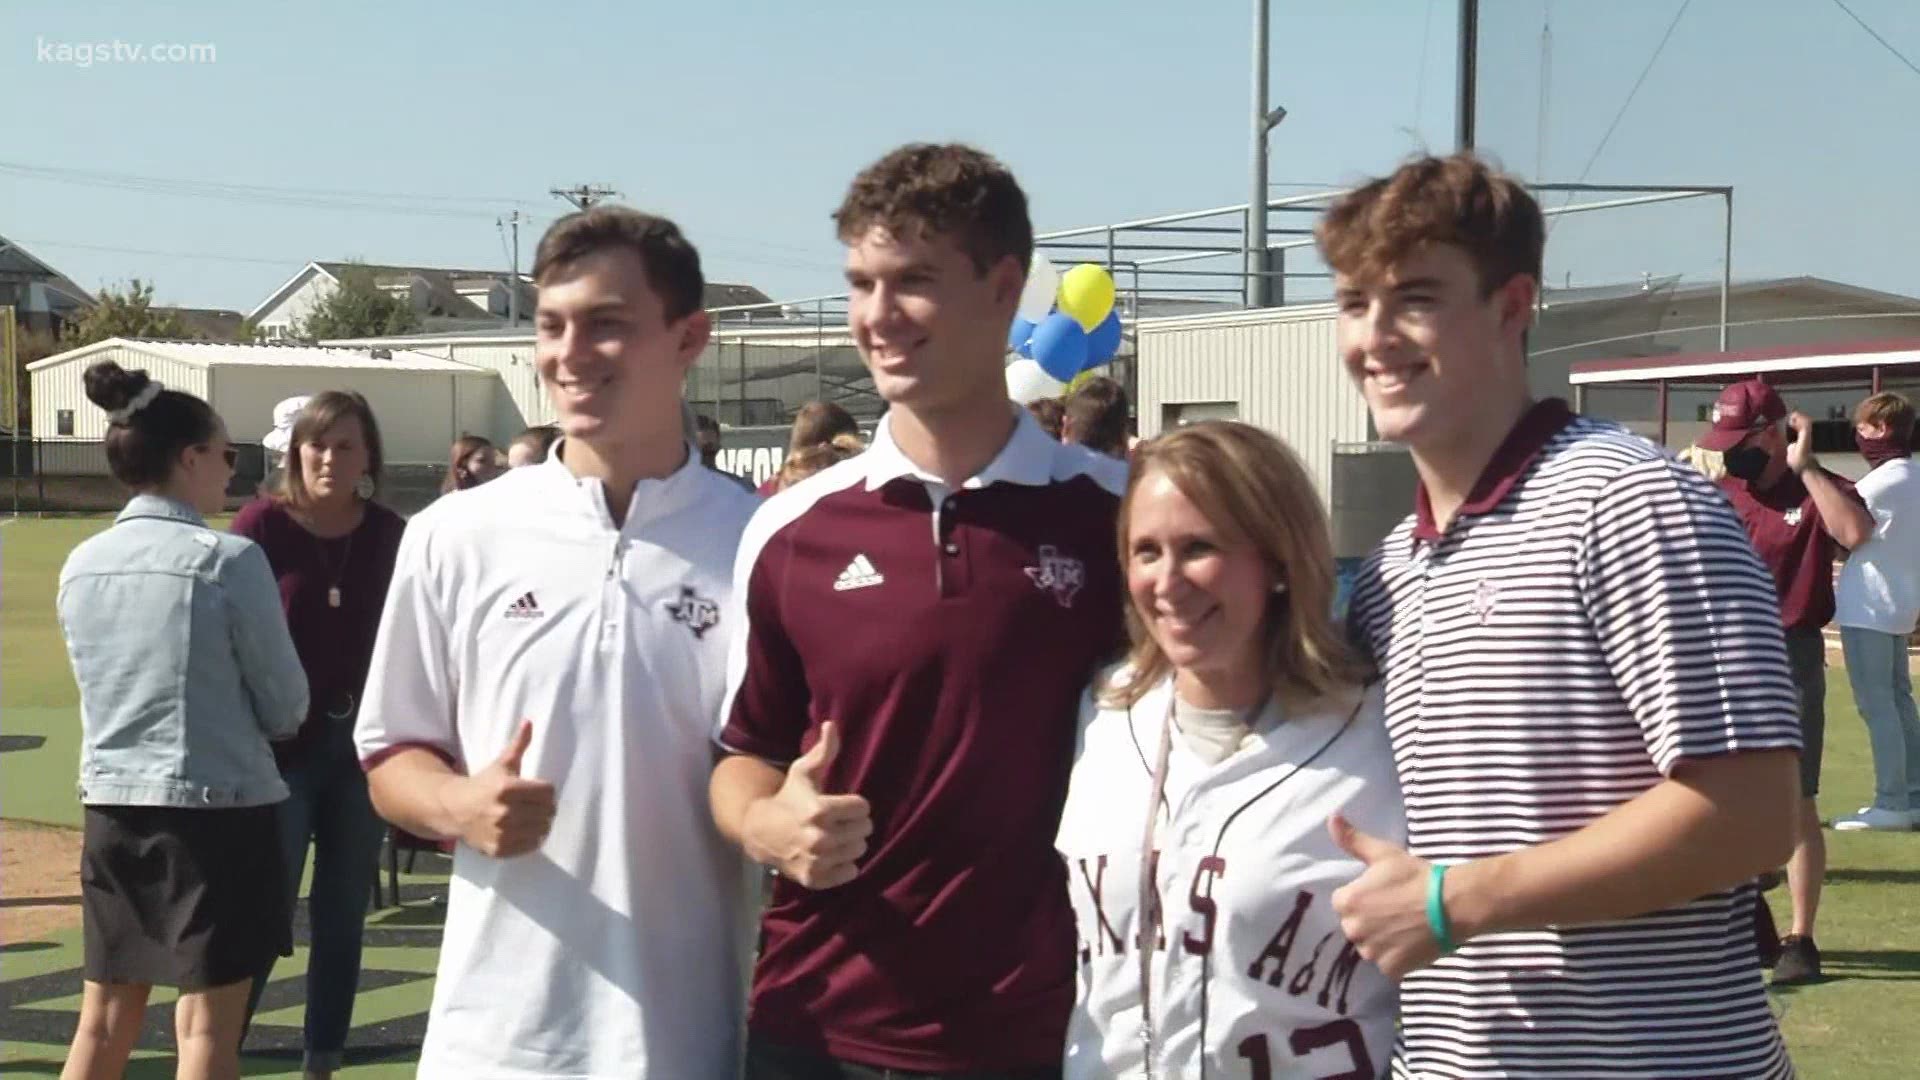 Watch as numerous athletes from College Station and A&M Consolidated high school sign a National Letter of Intent to play at the collegiate level.